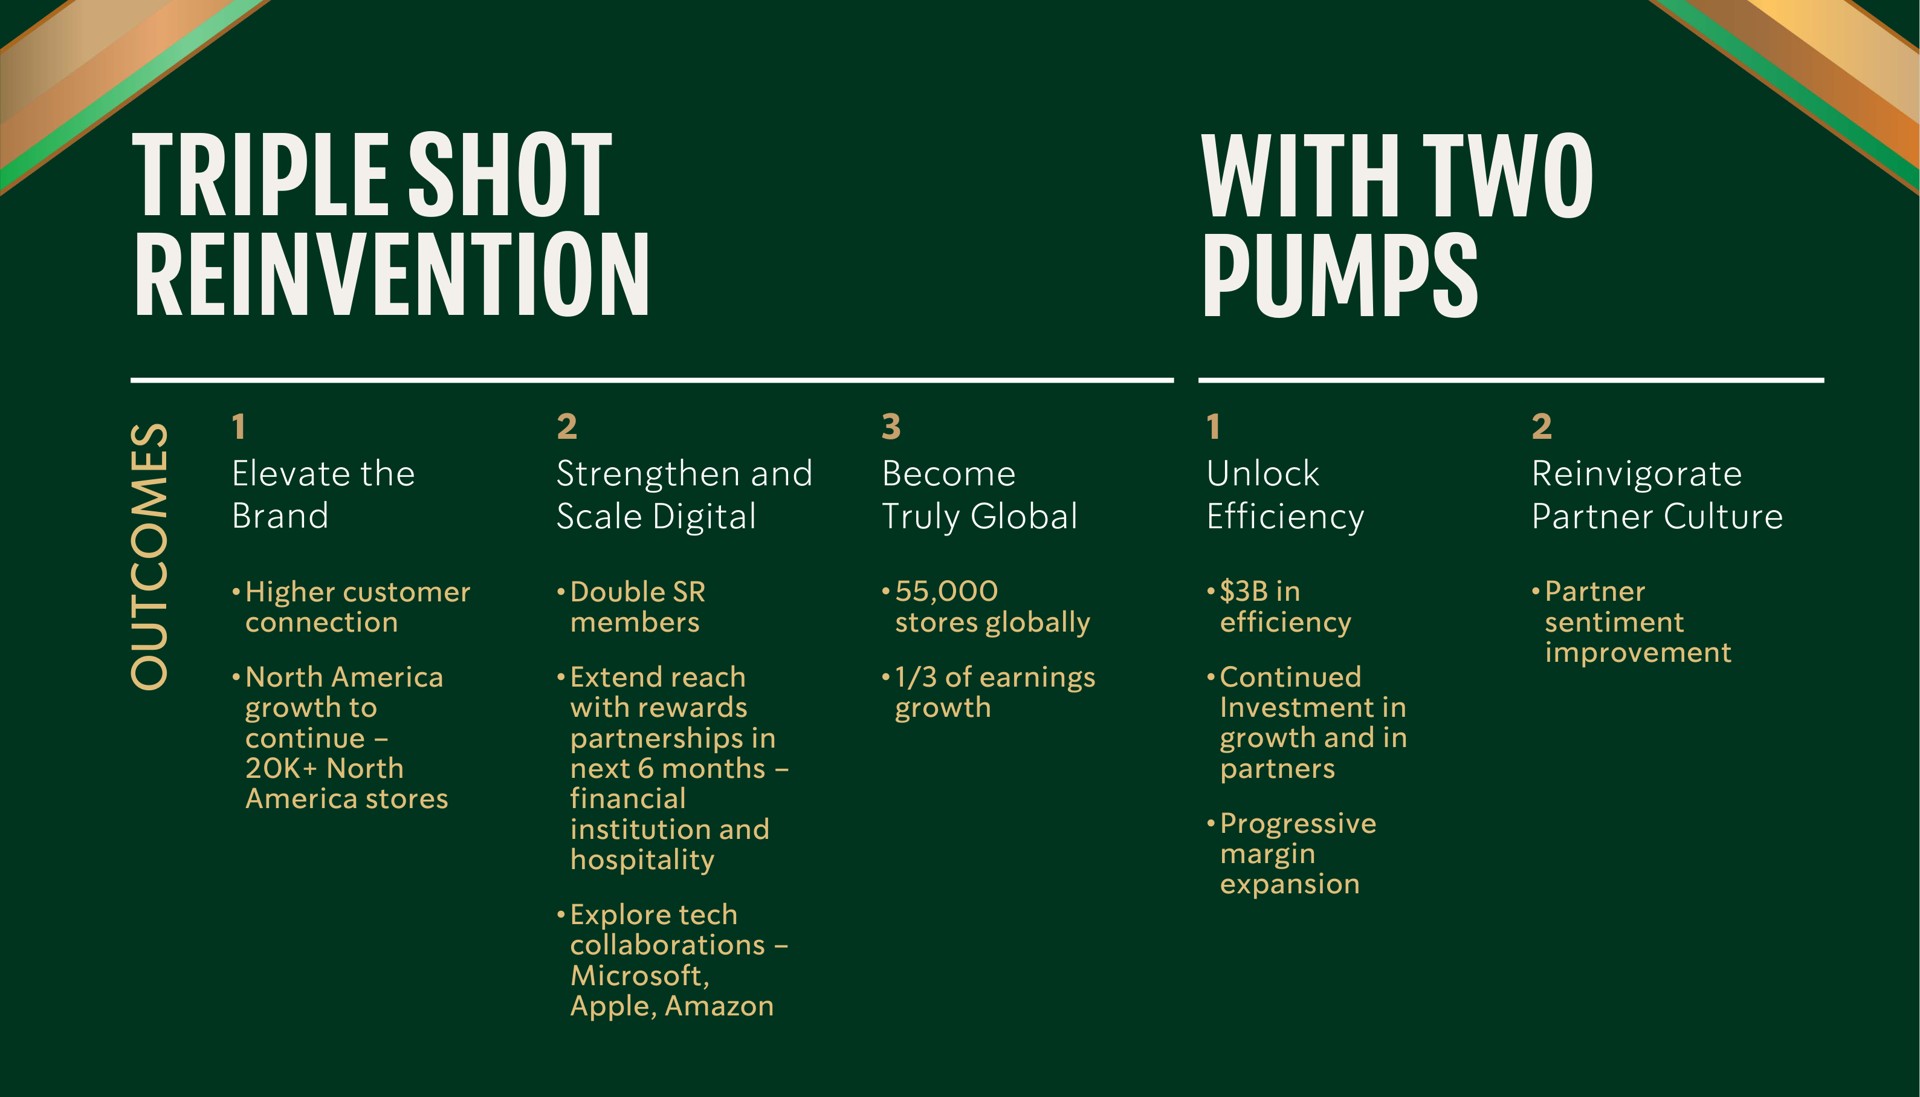 triple shot reinvention with two pumps | Starbucks